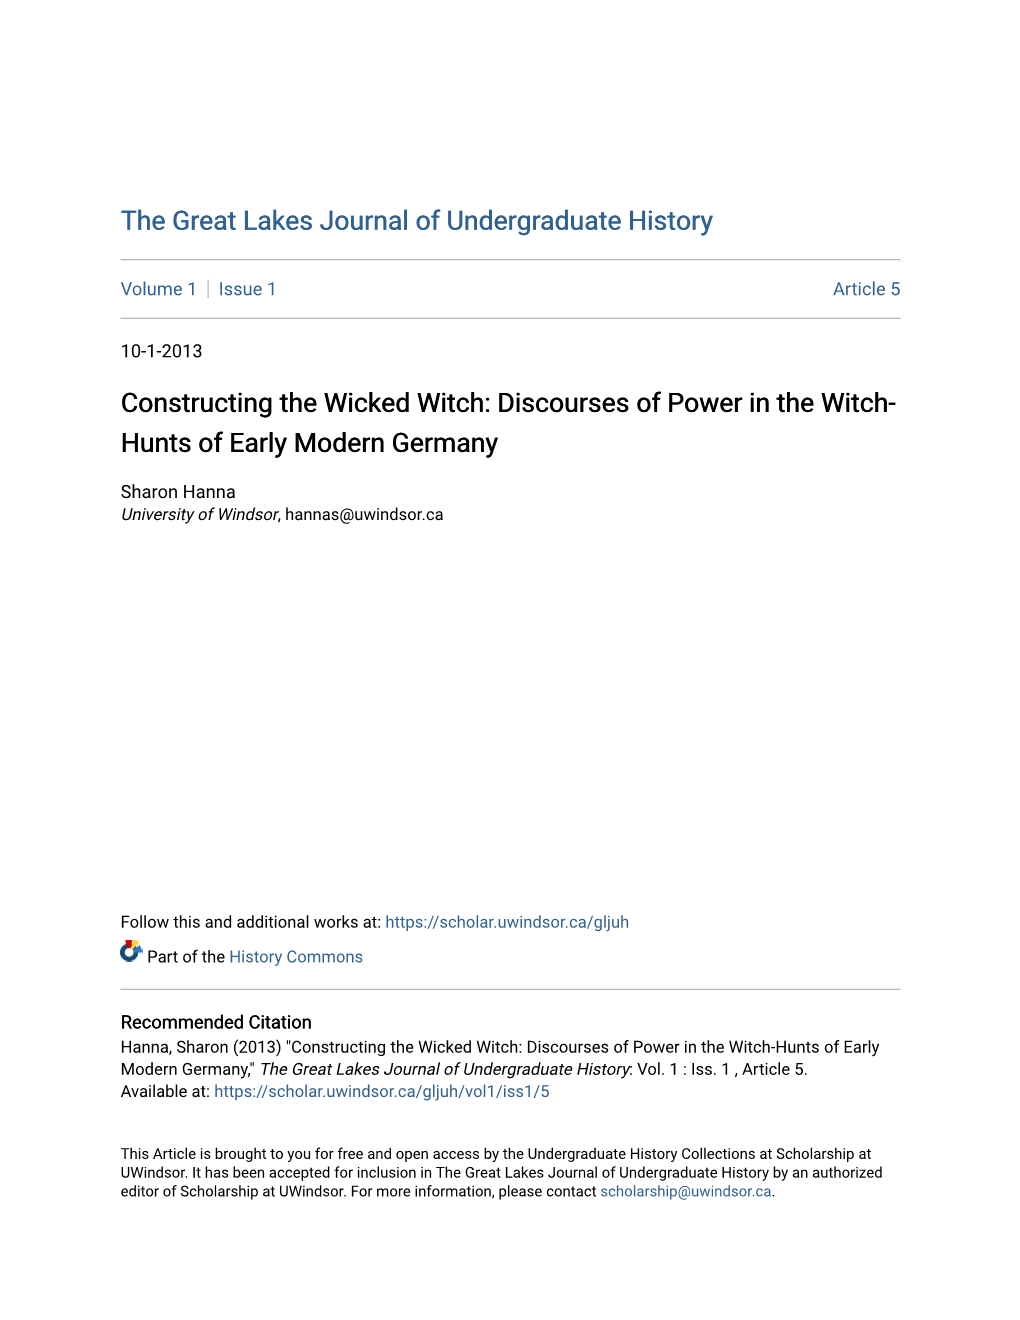 Constructing the Wicked Witch: Discourses of Power in the Witch-Hunts of Early Modern Germany," the Great Lakes Journal of Undergraduate History: Vol